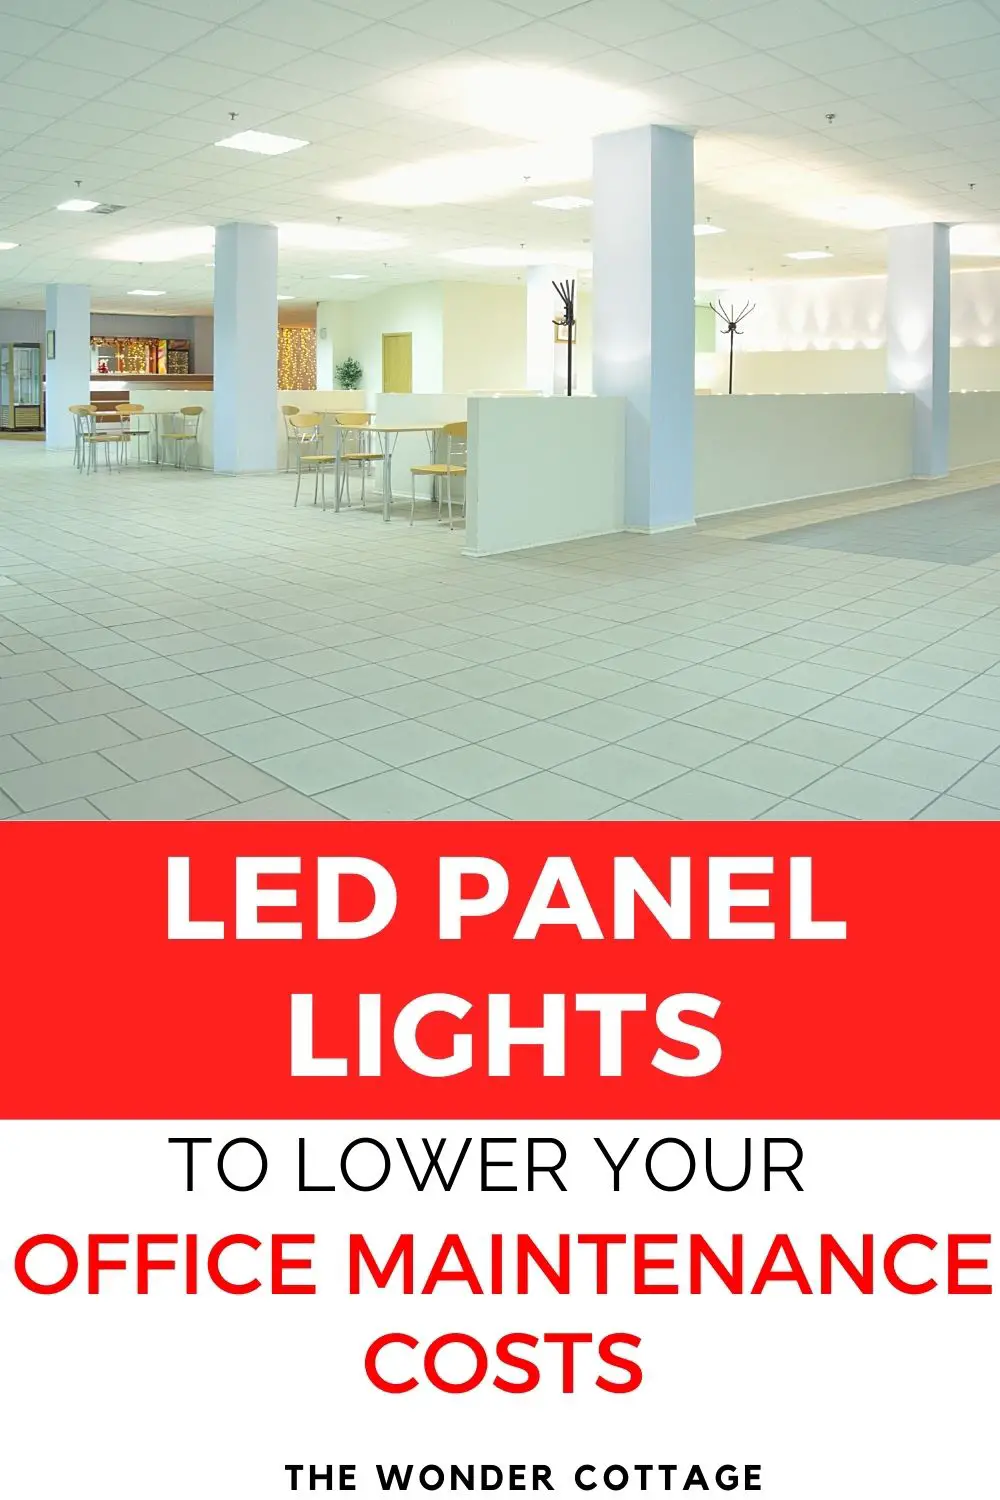 LED panel lights to lower your office maintenance costs